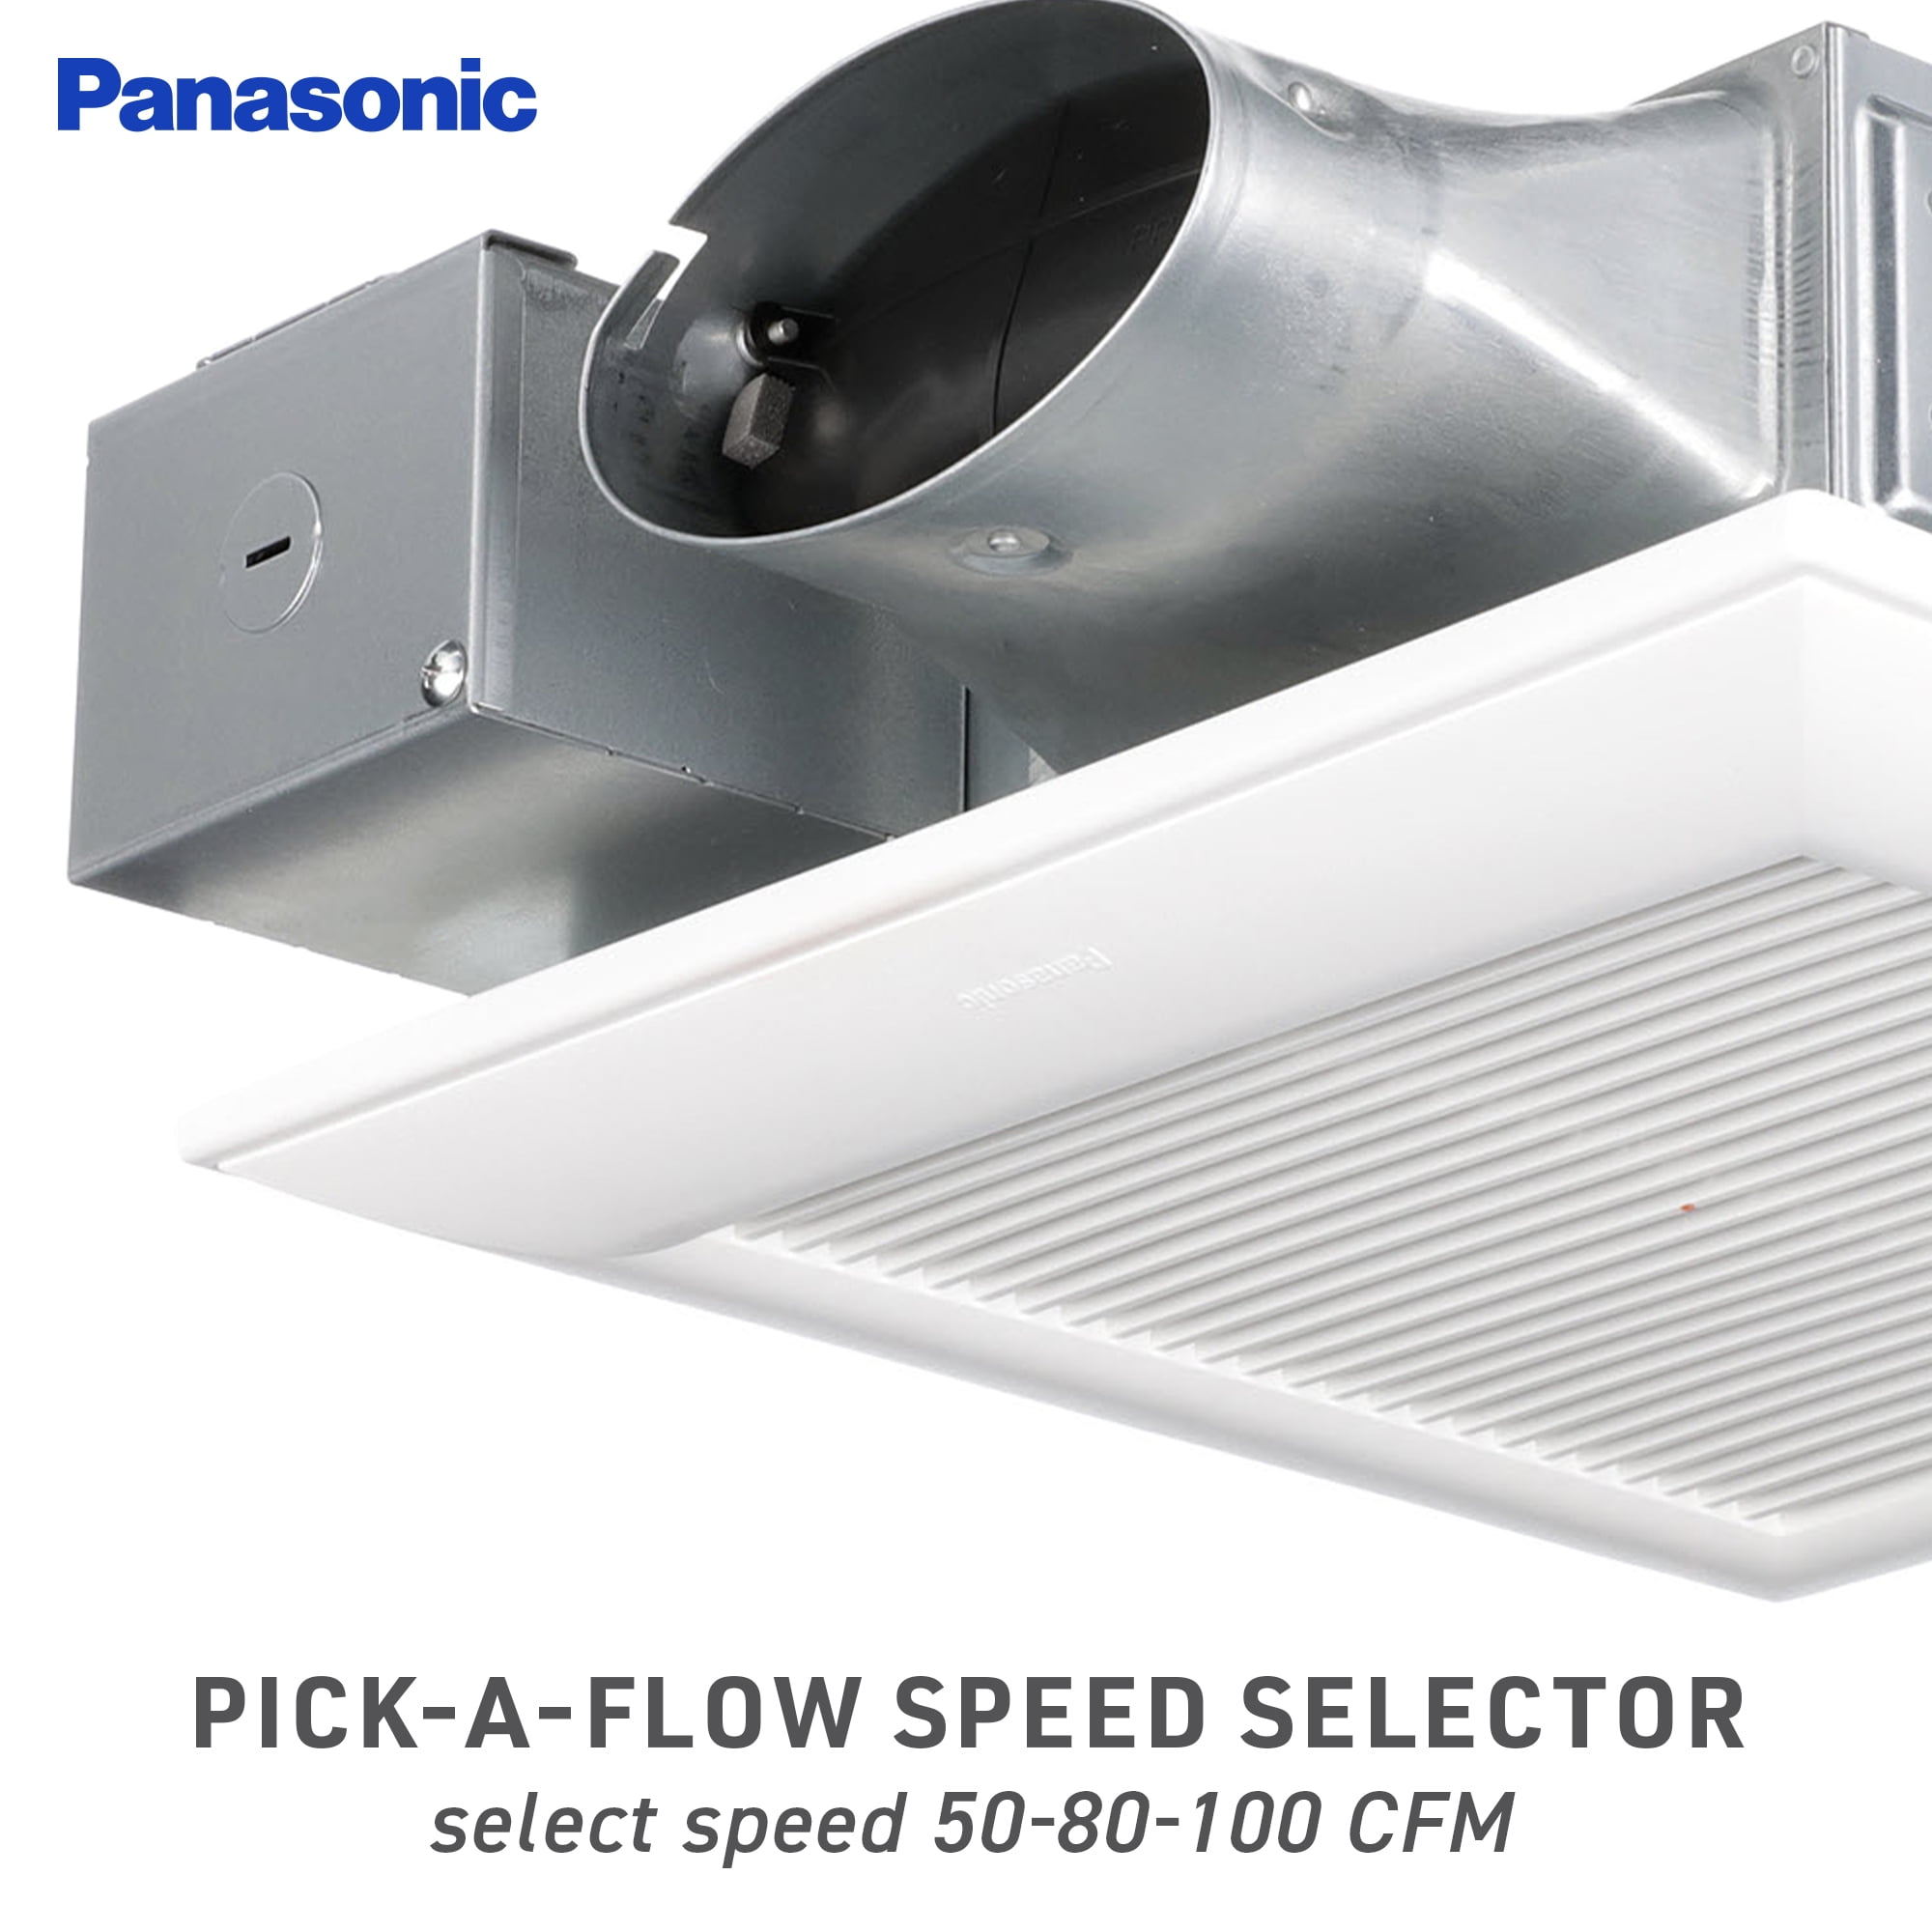 Panasonic WhisperValue DC Pick-a-Flow 50, 80, or 100 CFM Ceiling or Wall,  Very Low Profile Exhaust Fan with Condensation Sensor, White